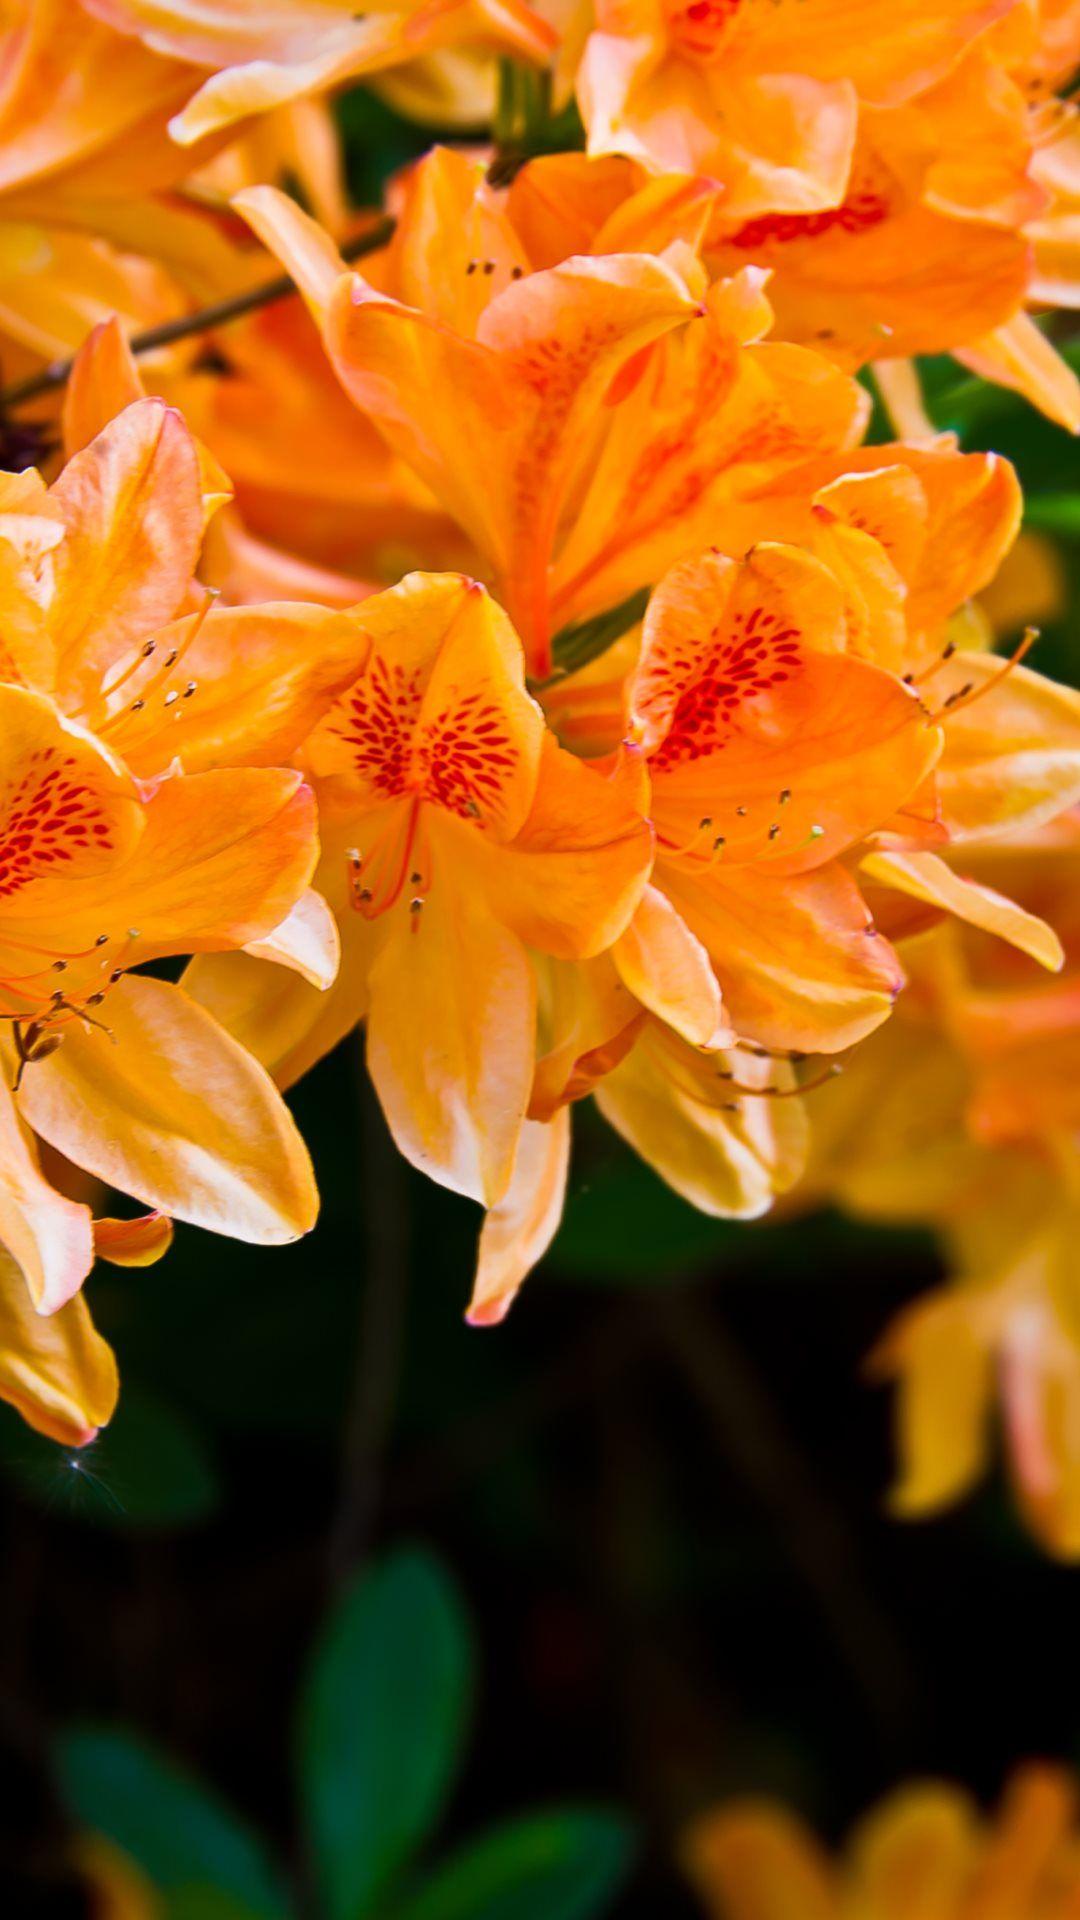 Light Orange Flowers HD Android Wallpaper free download